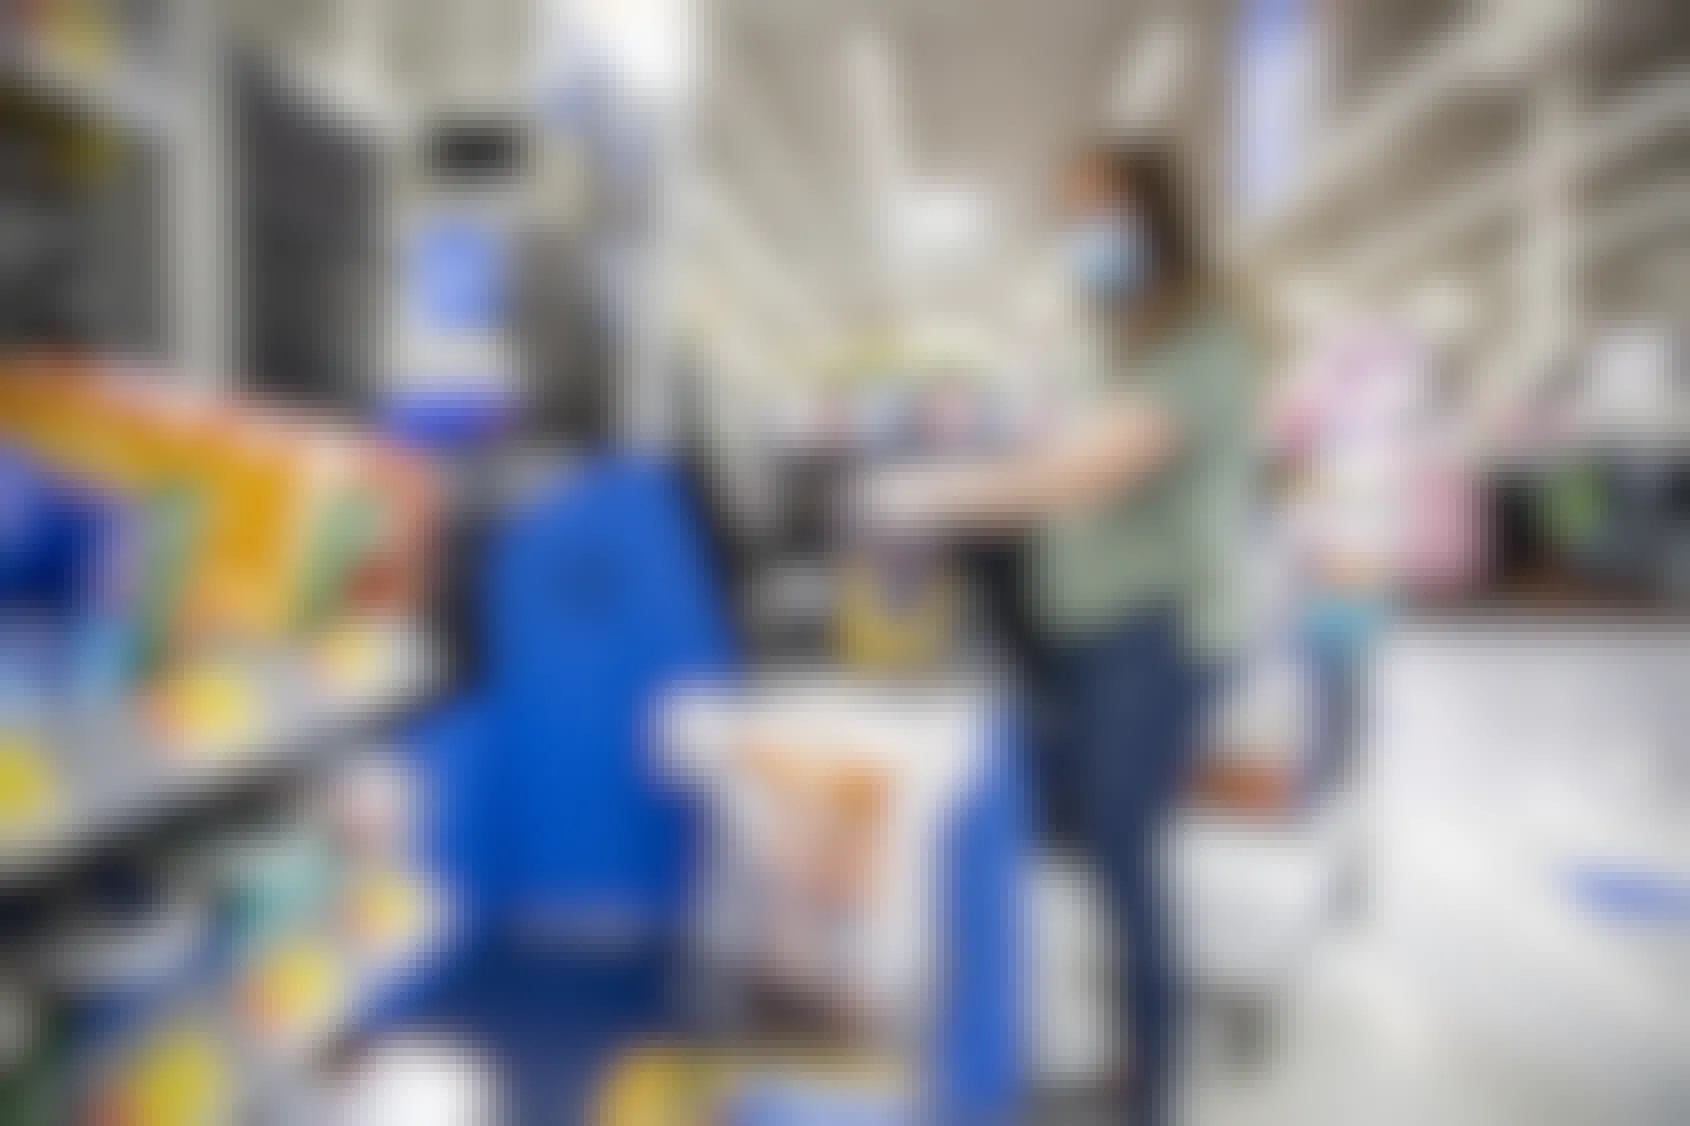 Walmart Is Thinking About Getting Rid of Cashiers